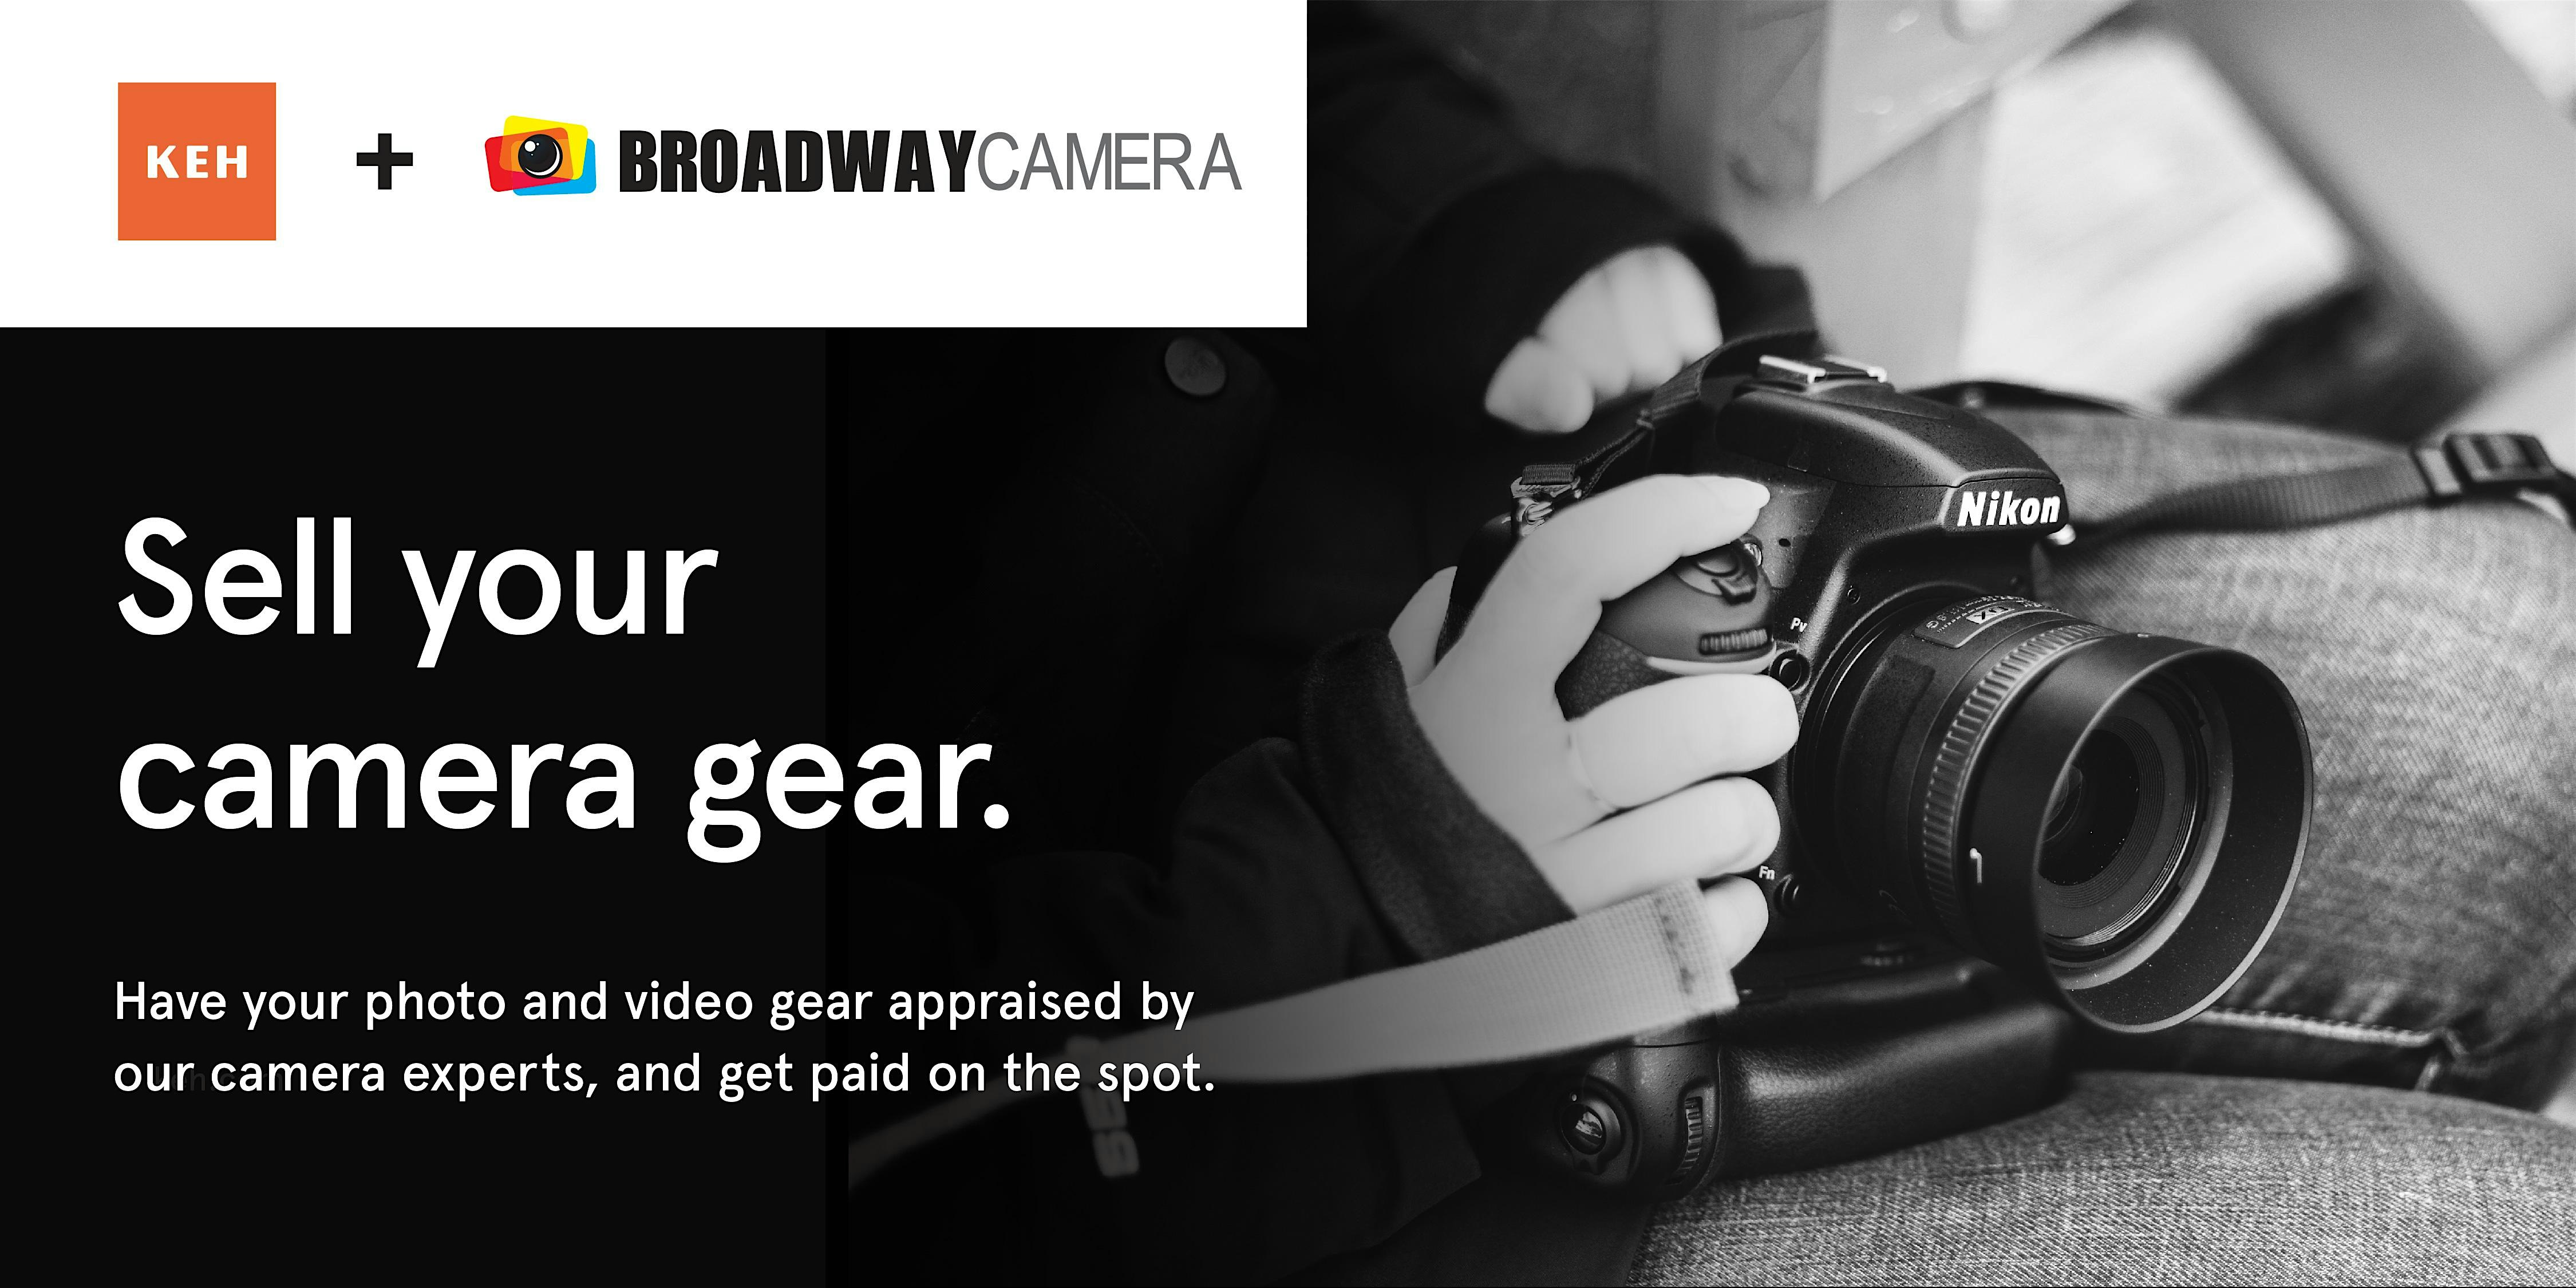 Sell your camera gear (free event) at Broadway Camera Richmond